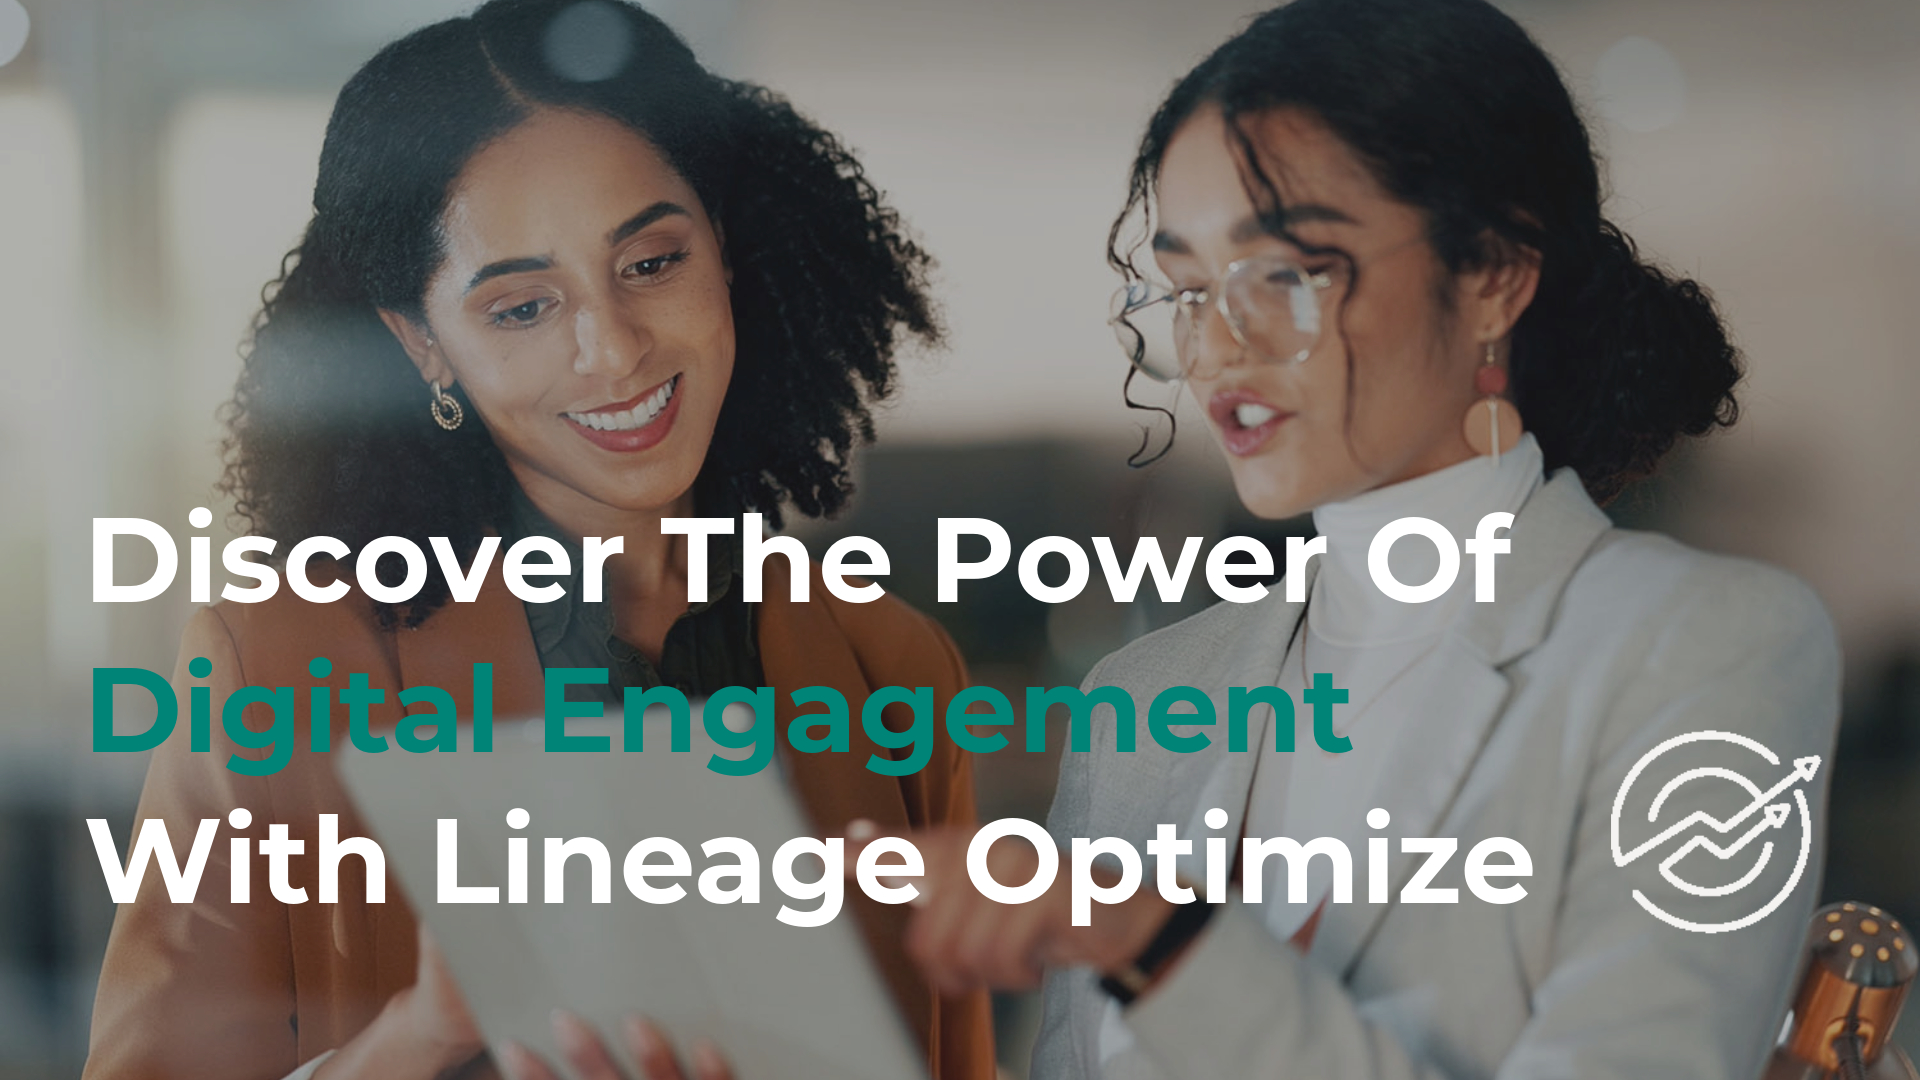 Discover the power of digital engagement with Lineage Optimize